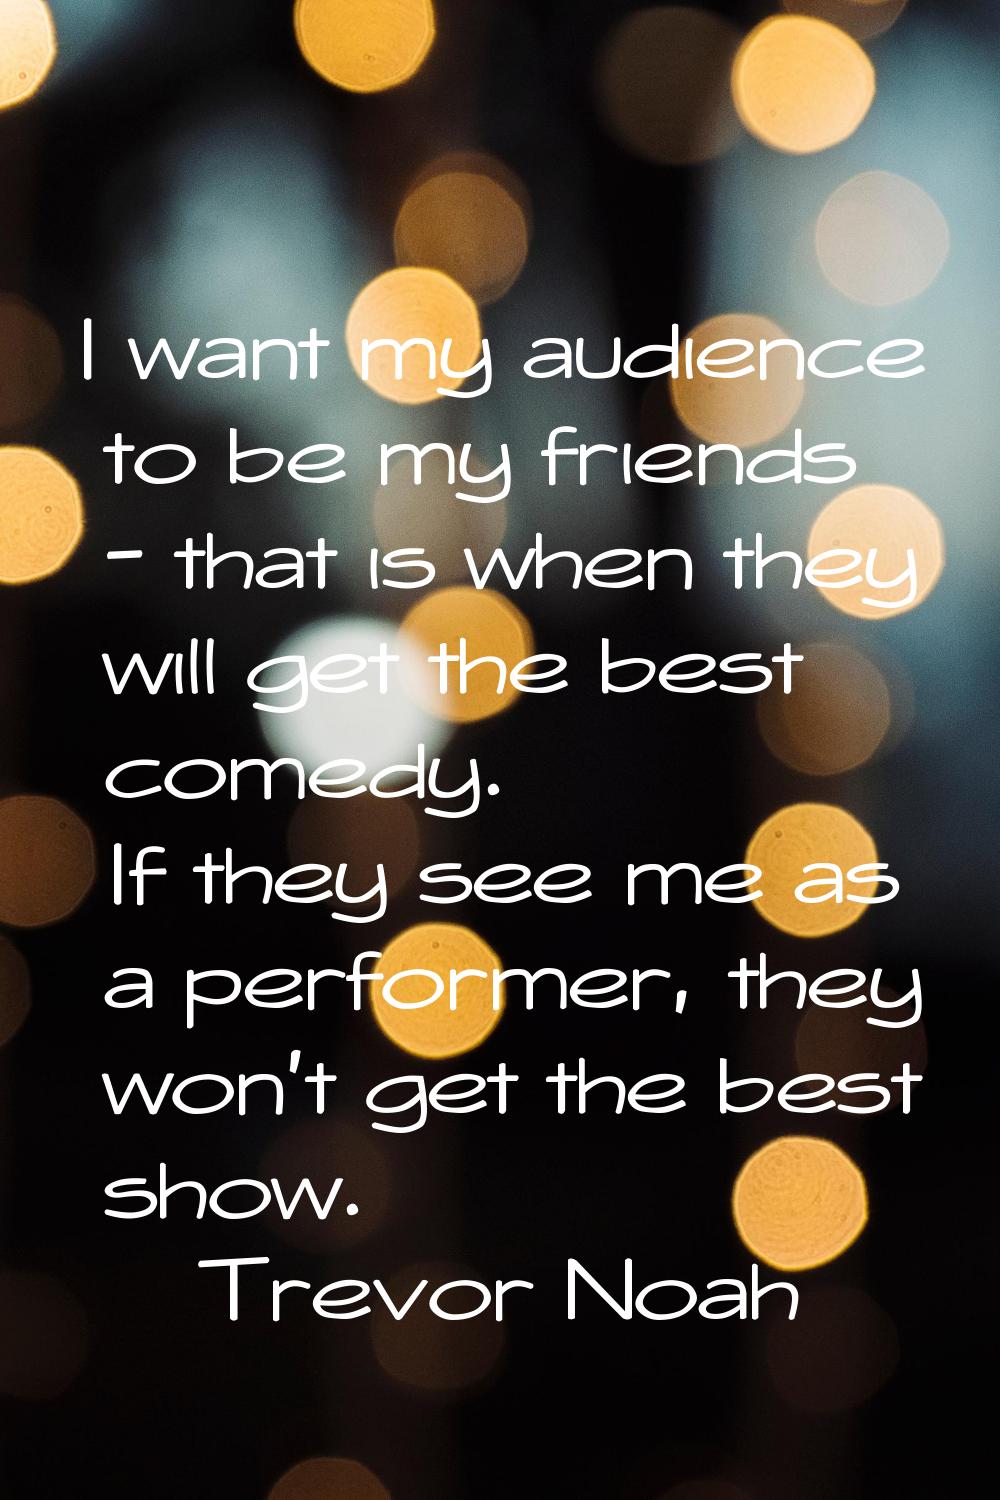 I want my audience to be my friends - that is when they will get the best comedy. If they see me as